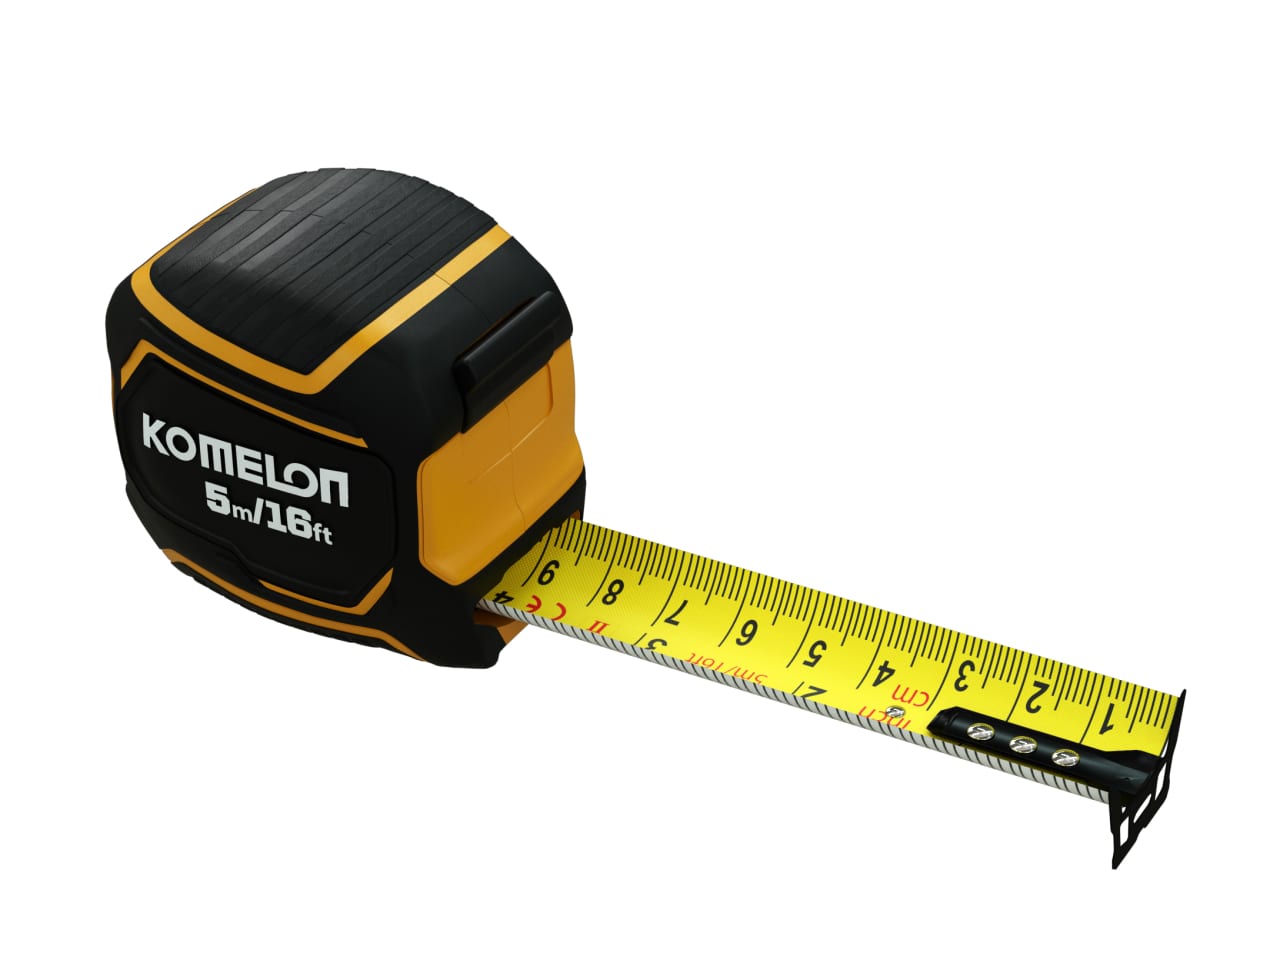 Komelon Extreme Stand-out Pocket Tape 5m/16ft